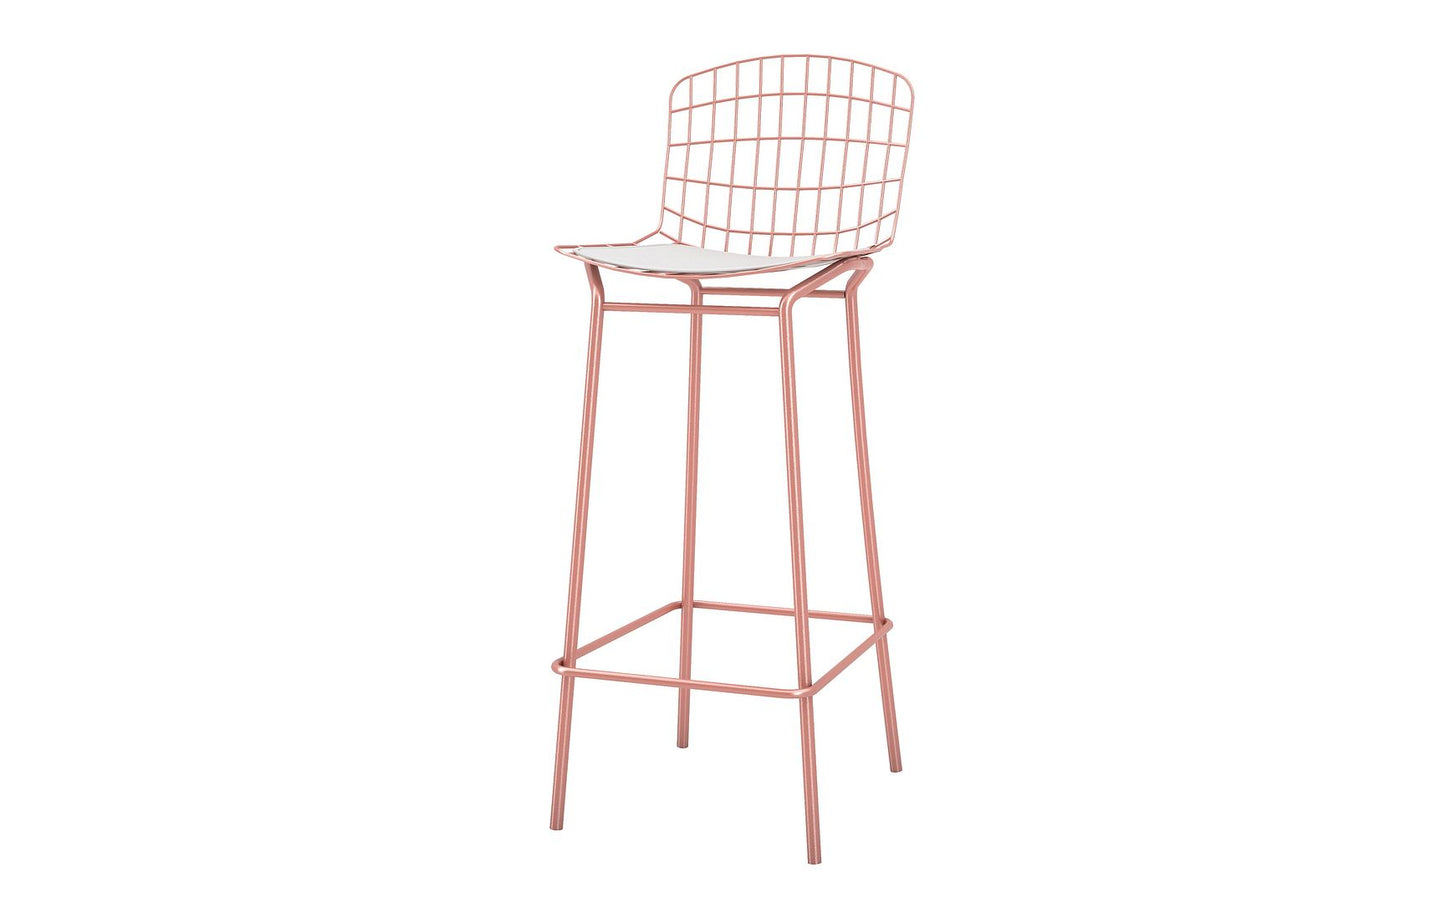 Manhattan Comfort Madeline 41.73" Barstool with Seat Cushion in Rose Pink Gold and White (Set of 2)